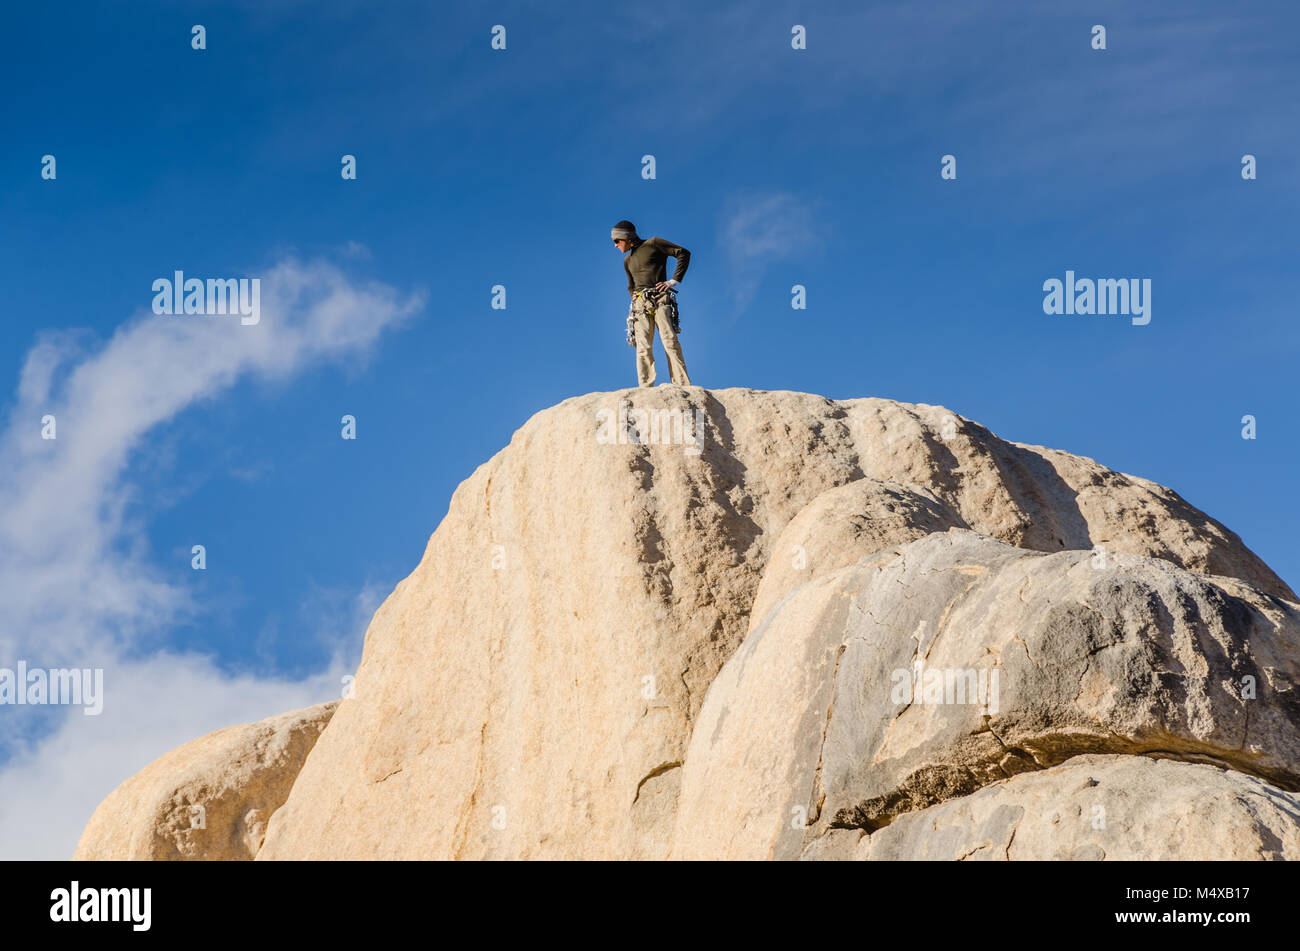 A male rock climber stands atop the summit of Intersection Rock, the prominent 150-foot tall monzonite monolith recognized as the birthplace of climbi Stock Photo